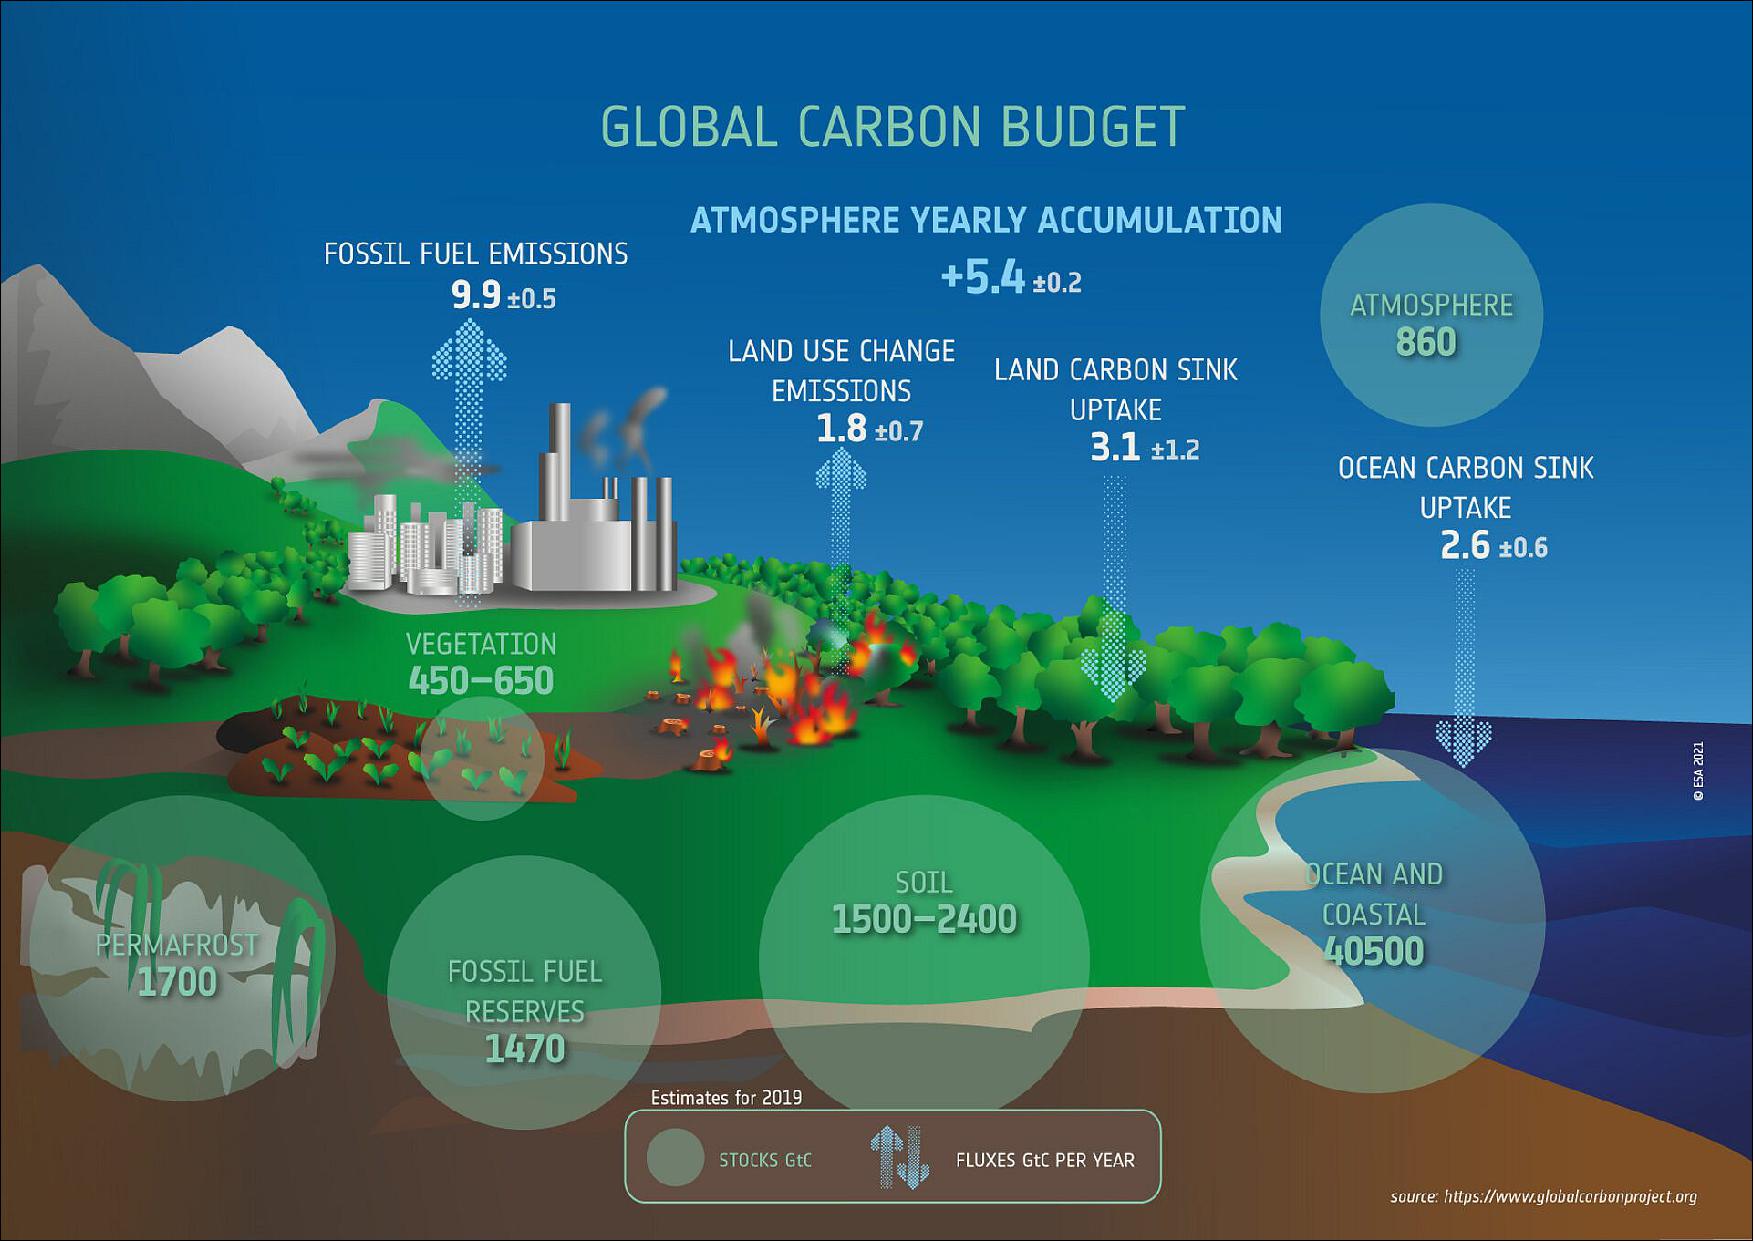 Figure 14: Global carbon budget. The Paris Agreement adopted a target for global warming not to exceed 1.5ºC. This sets a limit on the additional carbon we can add to the atmosphere – the carbon budget. Only around 17% of the carbon budget is now left. That is about 10 years at current emission rates. But there is sufficient uncertainty (indicated by the ± signs in the graphic across all the components of the carbon cycle that there is a small probability we have no remaining carbon budget. This means that even if emissions were to go to zero today, warming would still exceed 1.5ºC. - Fundamental to understanding the global carbon cycle is accurate knowledge of how much carbon is stored in the atmosphere, ocean and terrestrial biosphere – the carbon stocks and the rate of flow, or fluxes, between these stocks. With forest biomass representing a proxy for stored carbon, ESA's Biomass mission will measure forest biomass, height and disturbance to address gaps in our knowledge of the carbon cycle [image credit: ESA (data source: Global Carbon Project)]